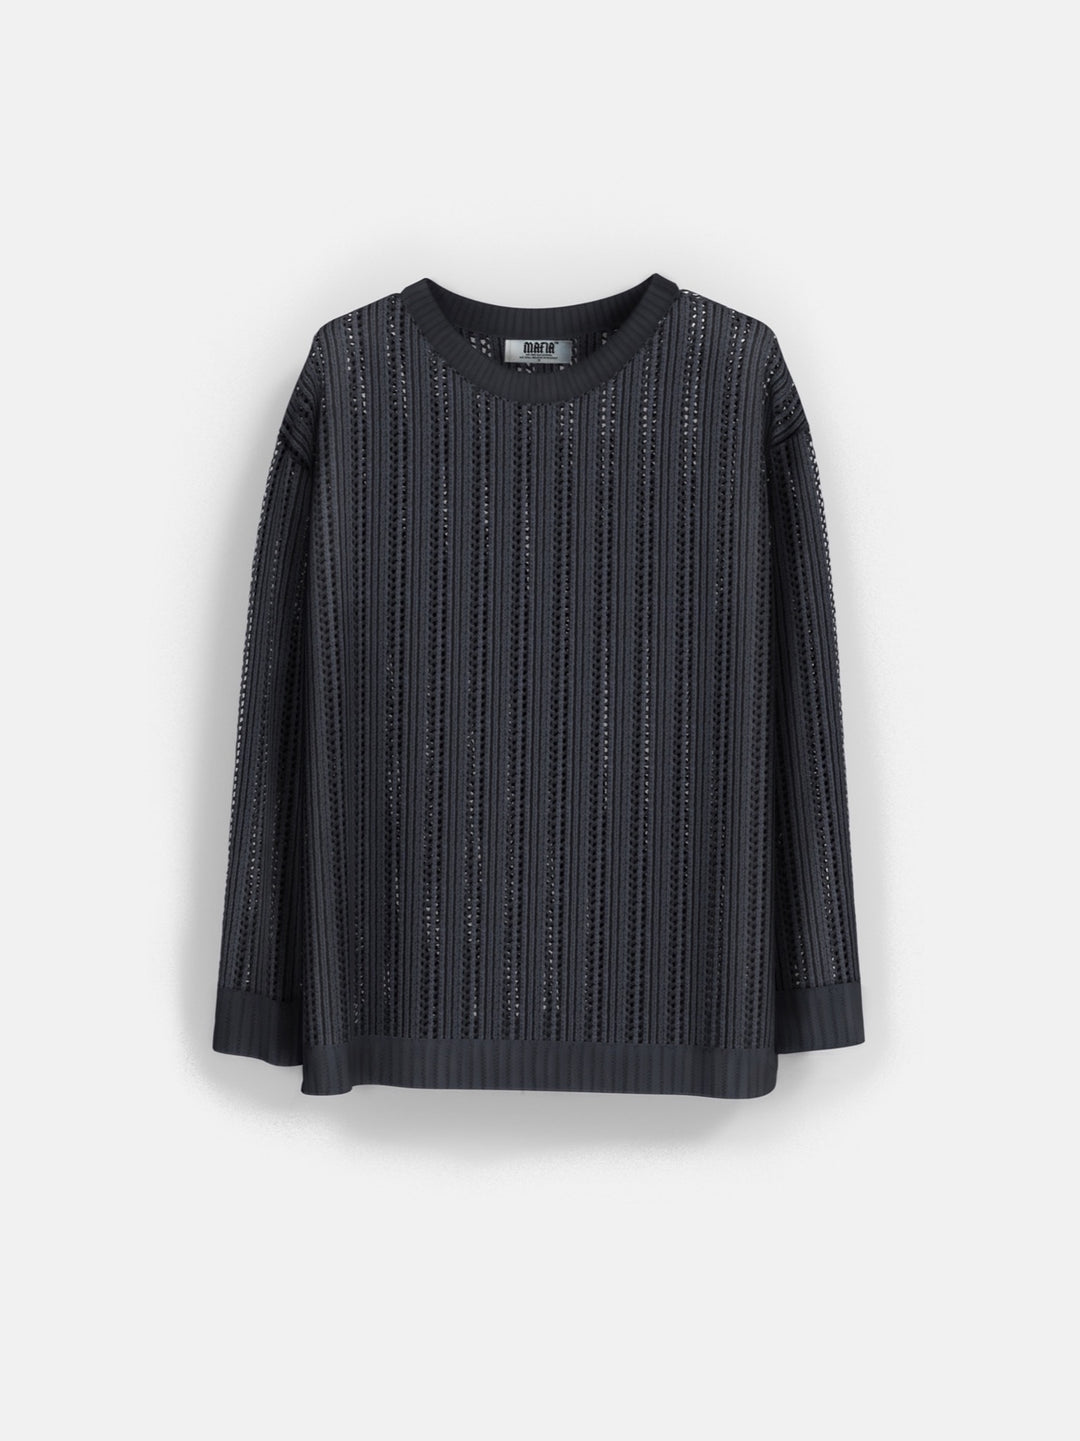 Oversize Knit Holey Sweater - Anthracite